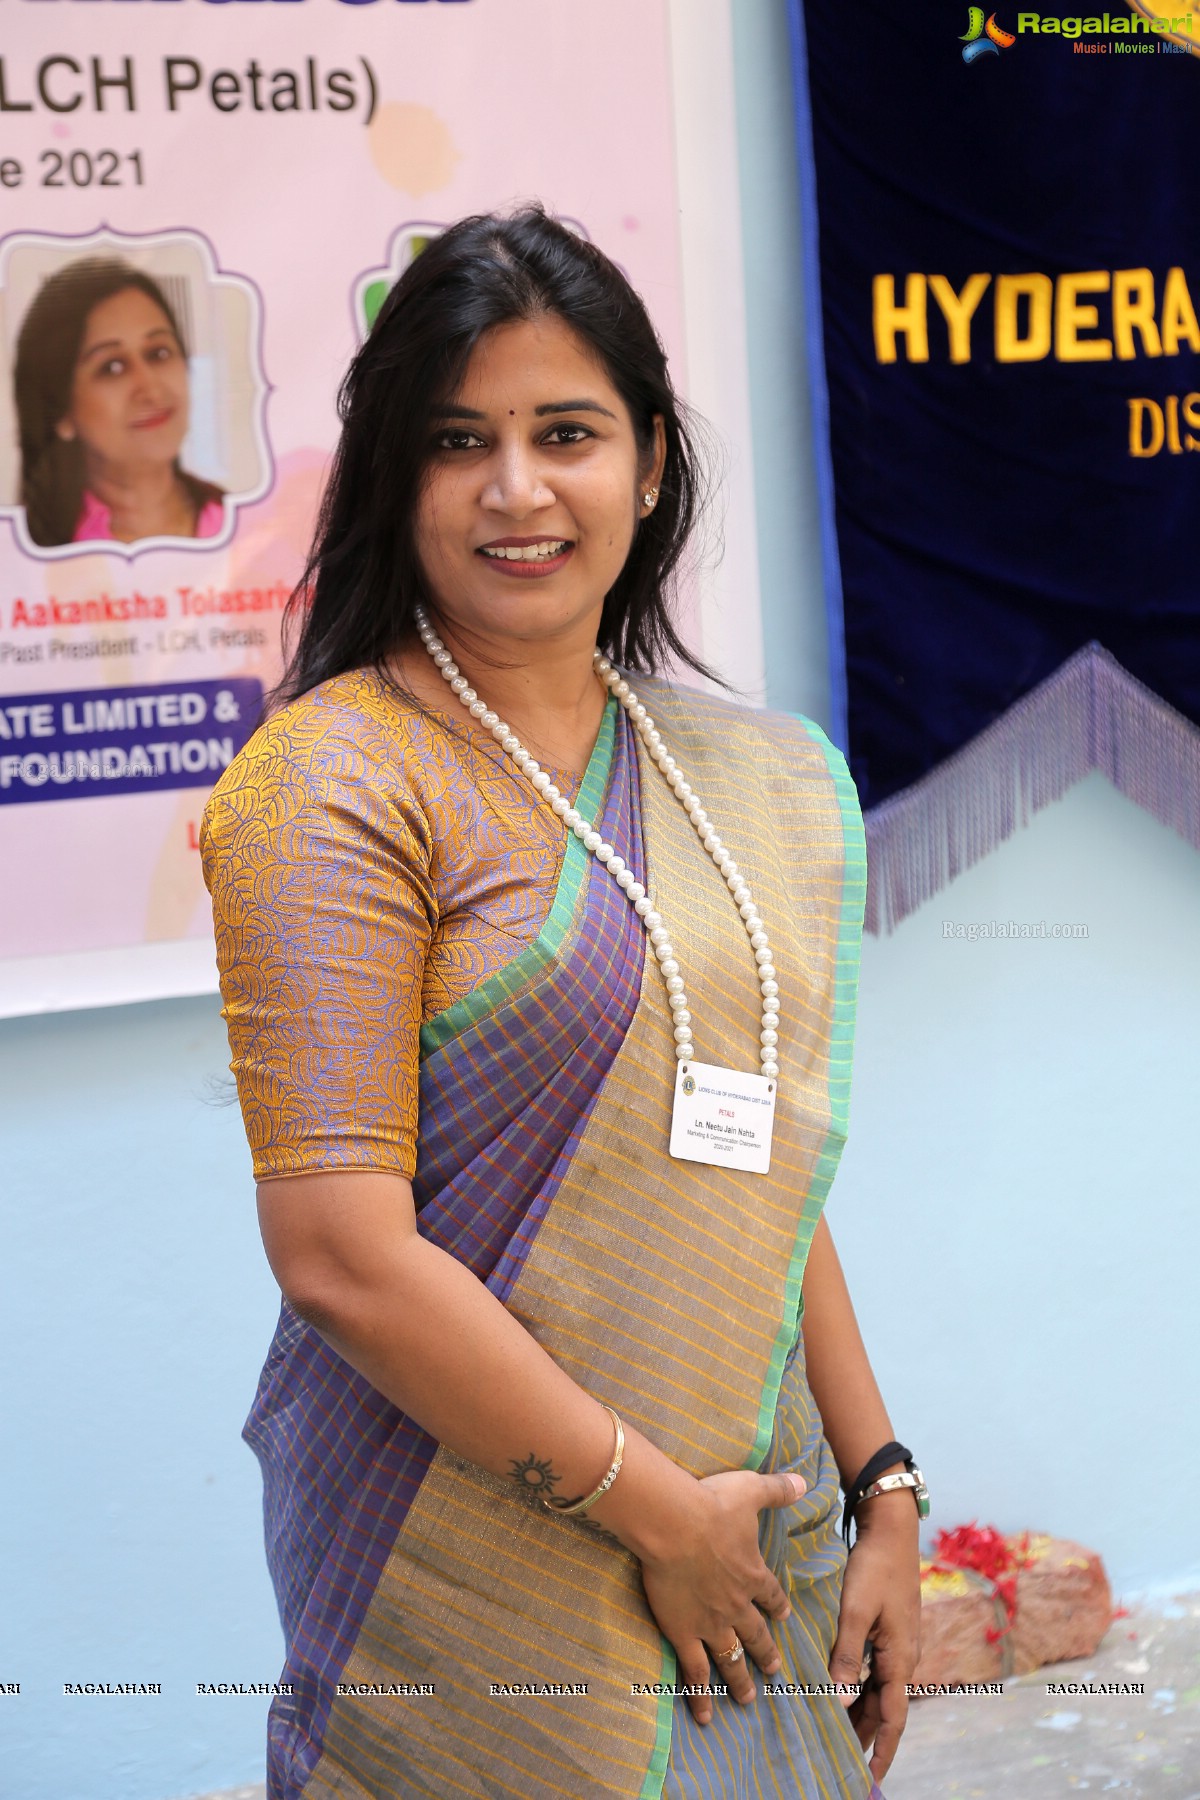 Lions Club of Hyderabad Petals Launches Charitable Clinic for Women and Children